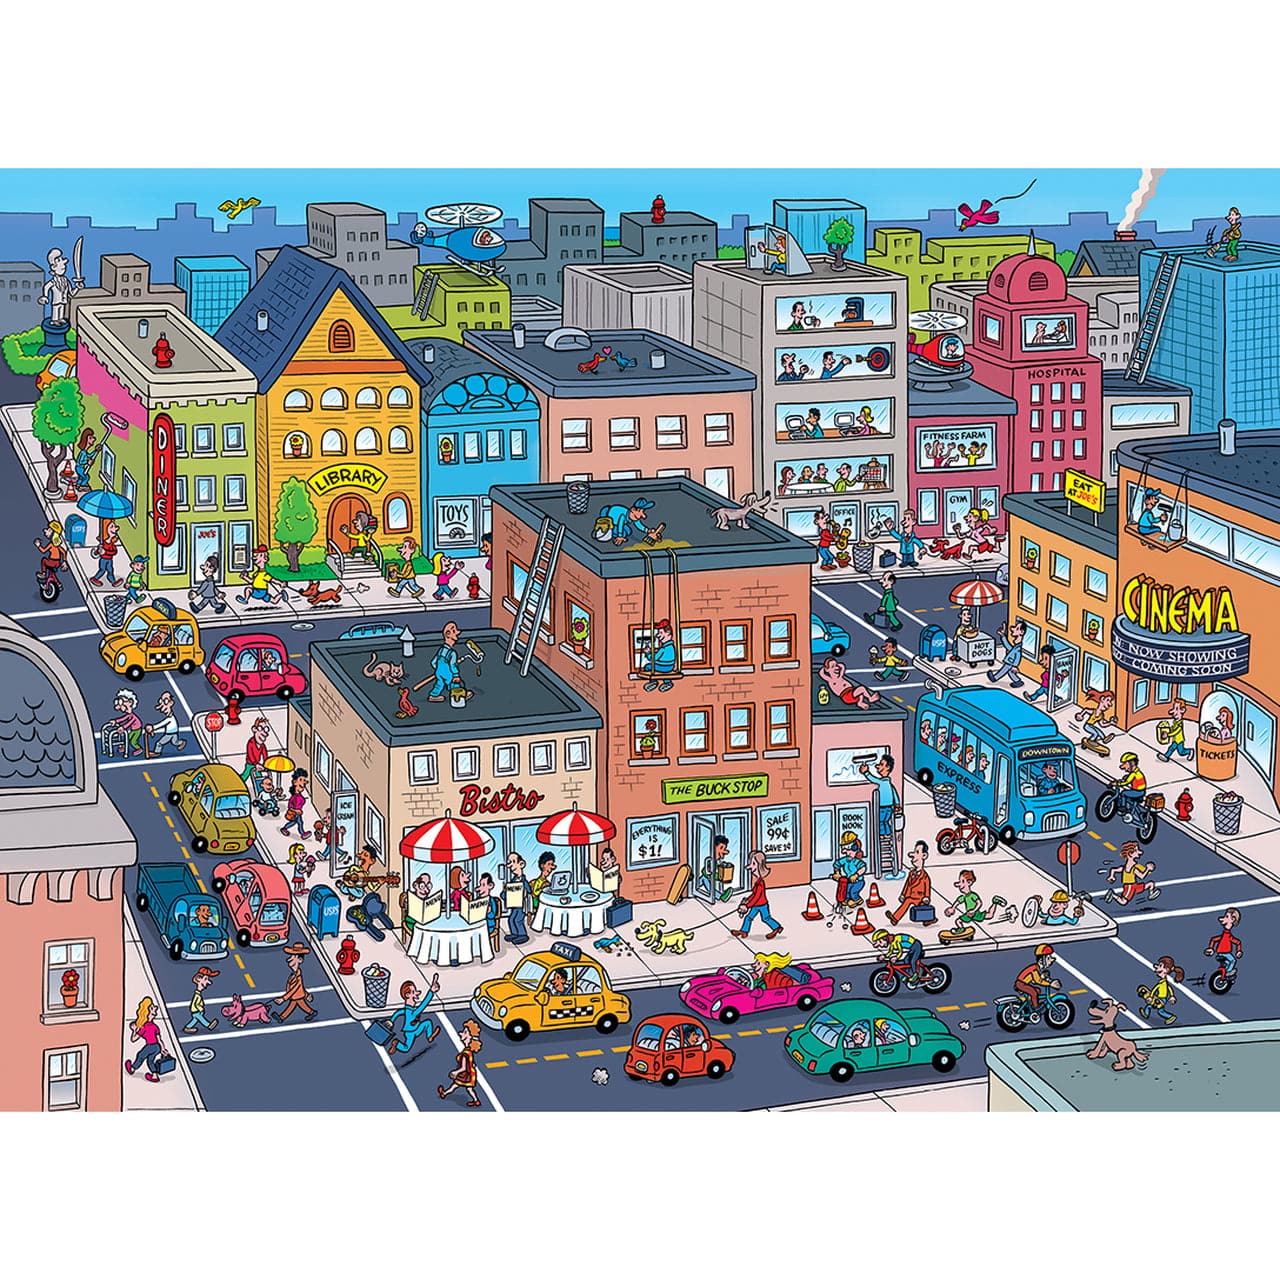 MasterPieces-101 Things to Spot - In Town - 101 Piece Puzzle-11927-Legacy Toys